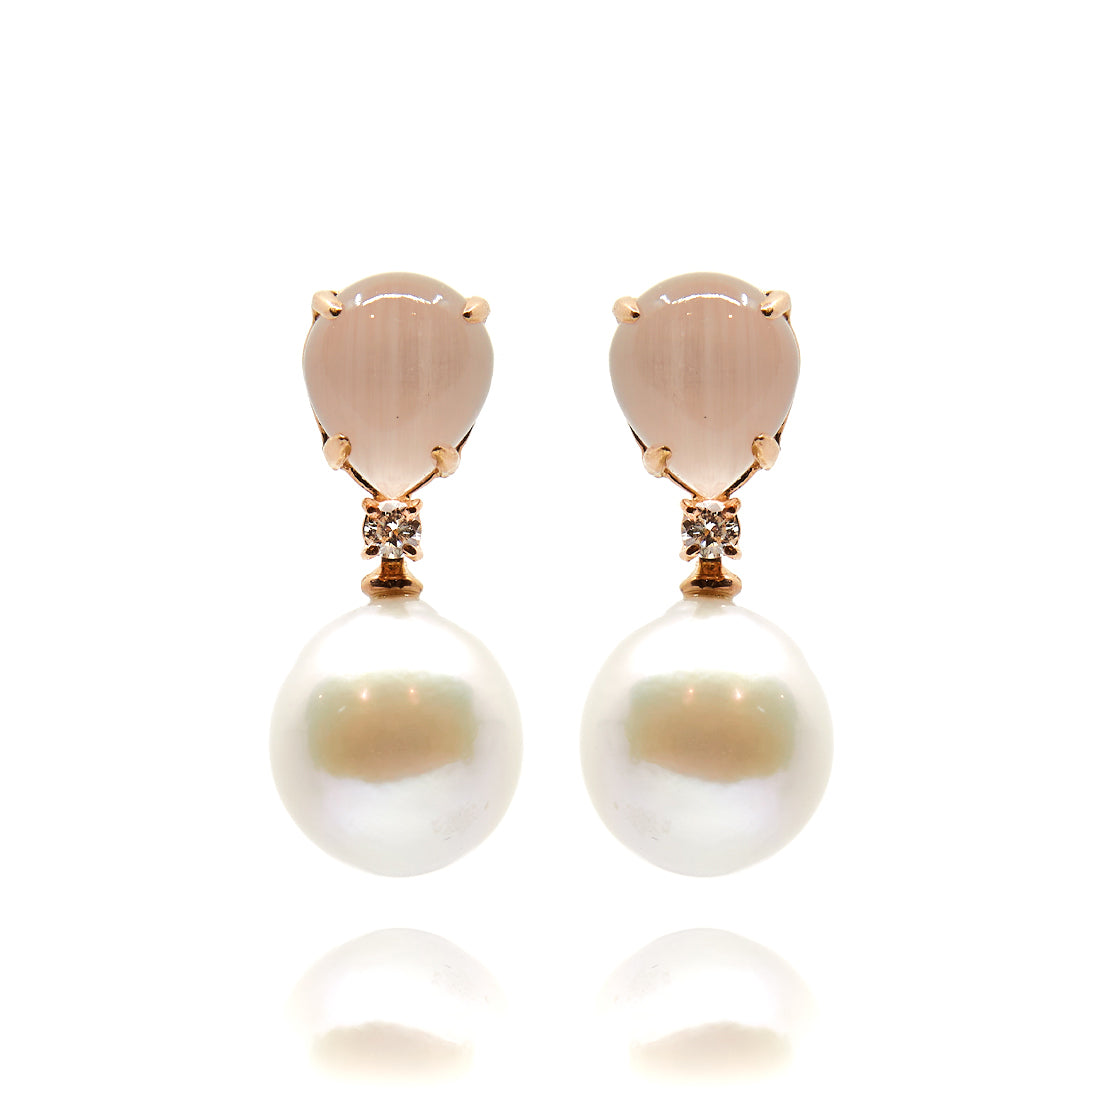 Rose gold pearl earrings with rose quartz 